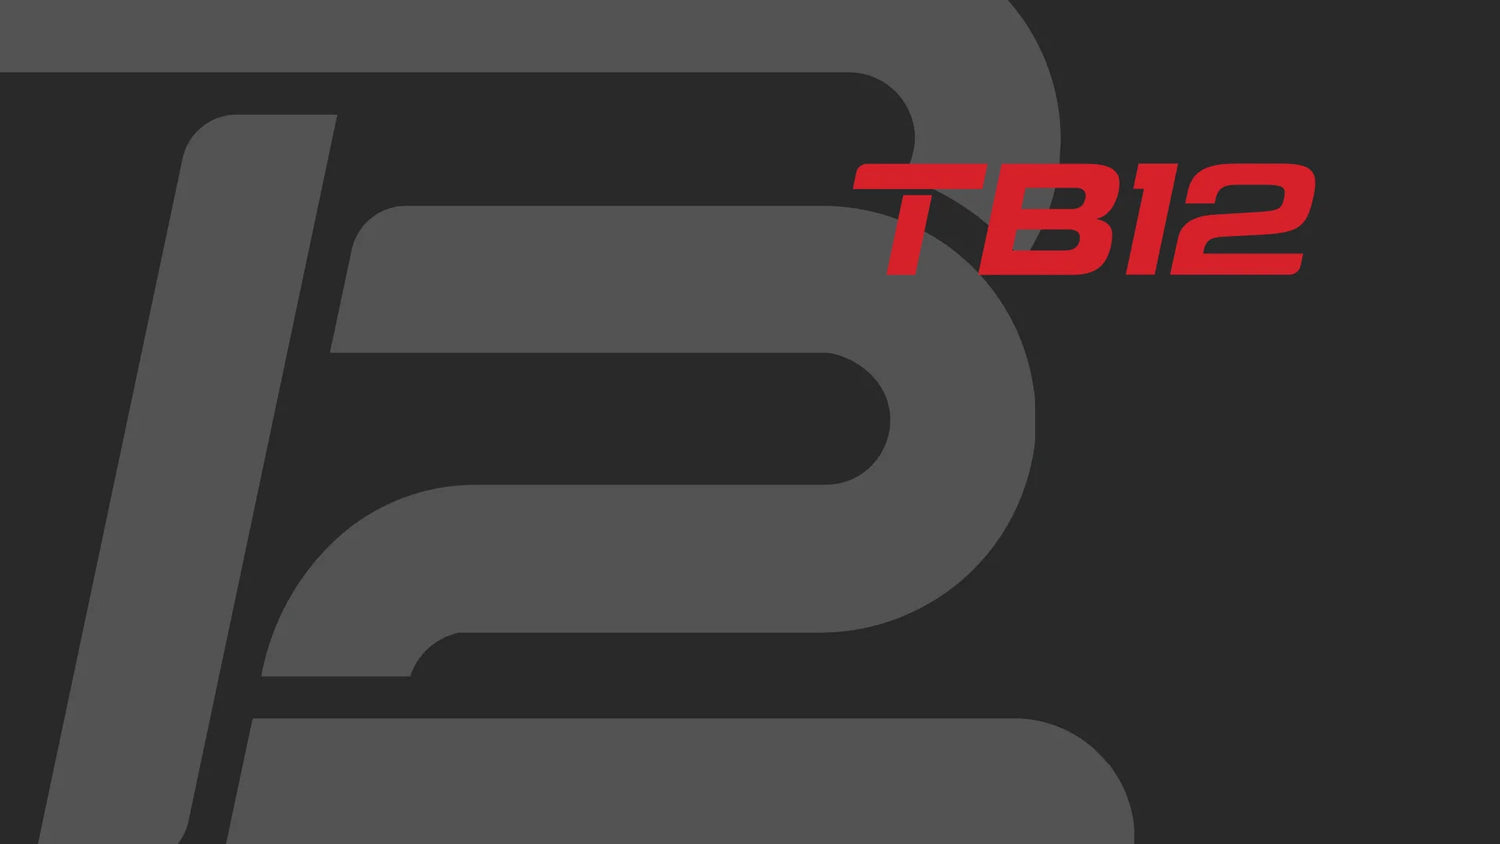 TB12 logo and wordmark on a black background